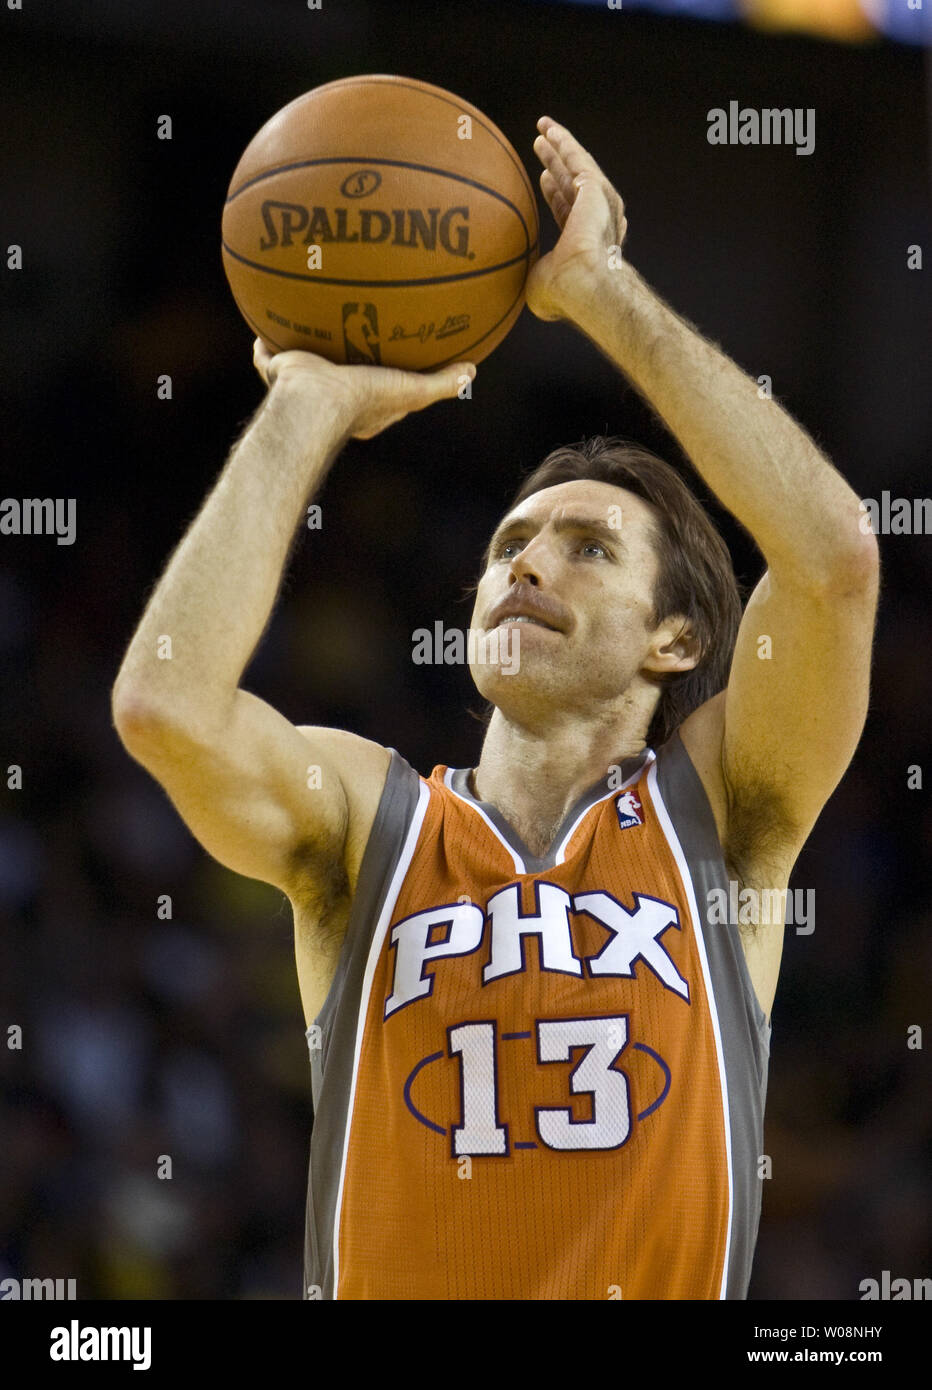 Phoenix Suns Steve Nash looks to the official for a foul in play against  the Golden State Warriors in the second quarter at Oracle Arena in Oakland,  California on February 4, 2009. (